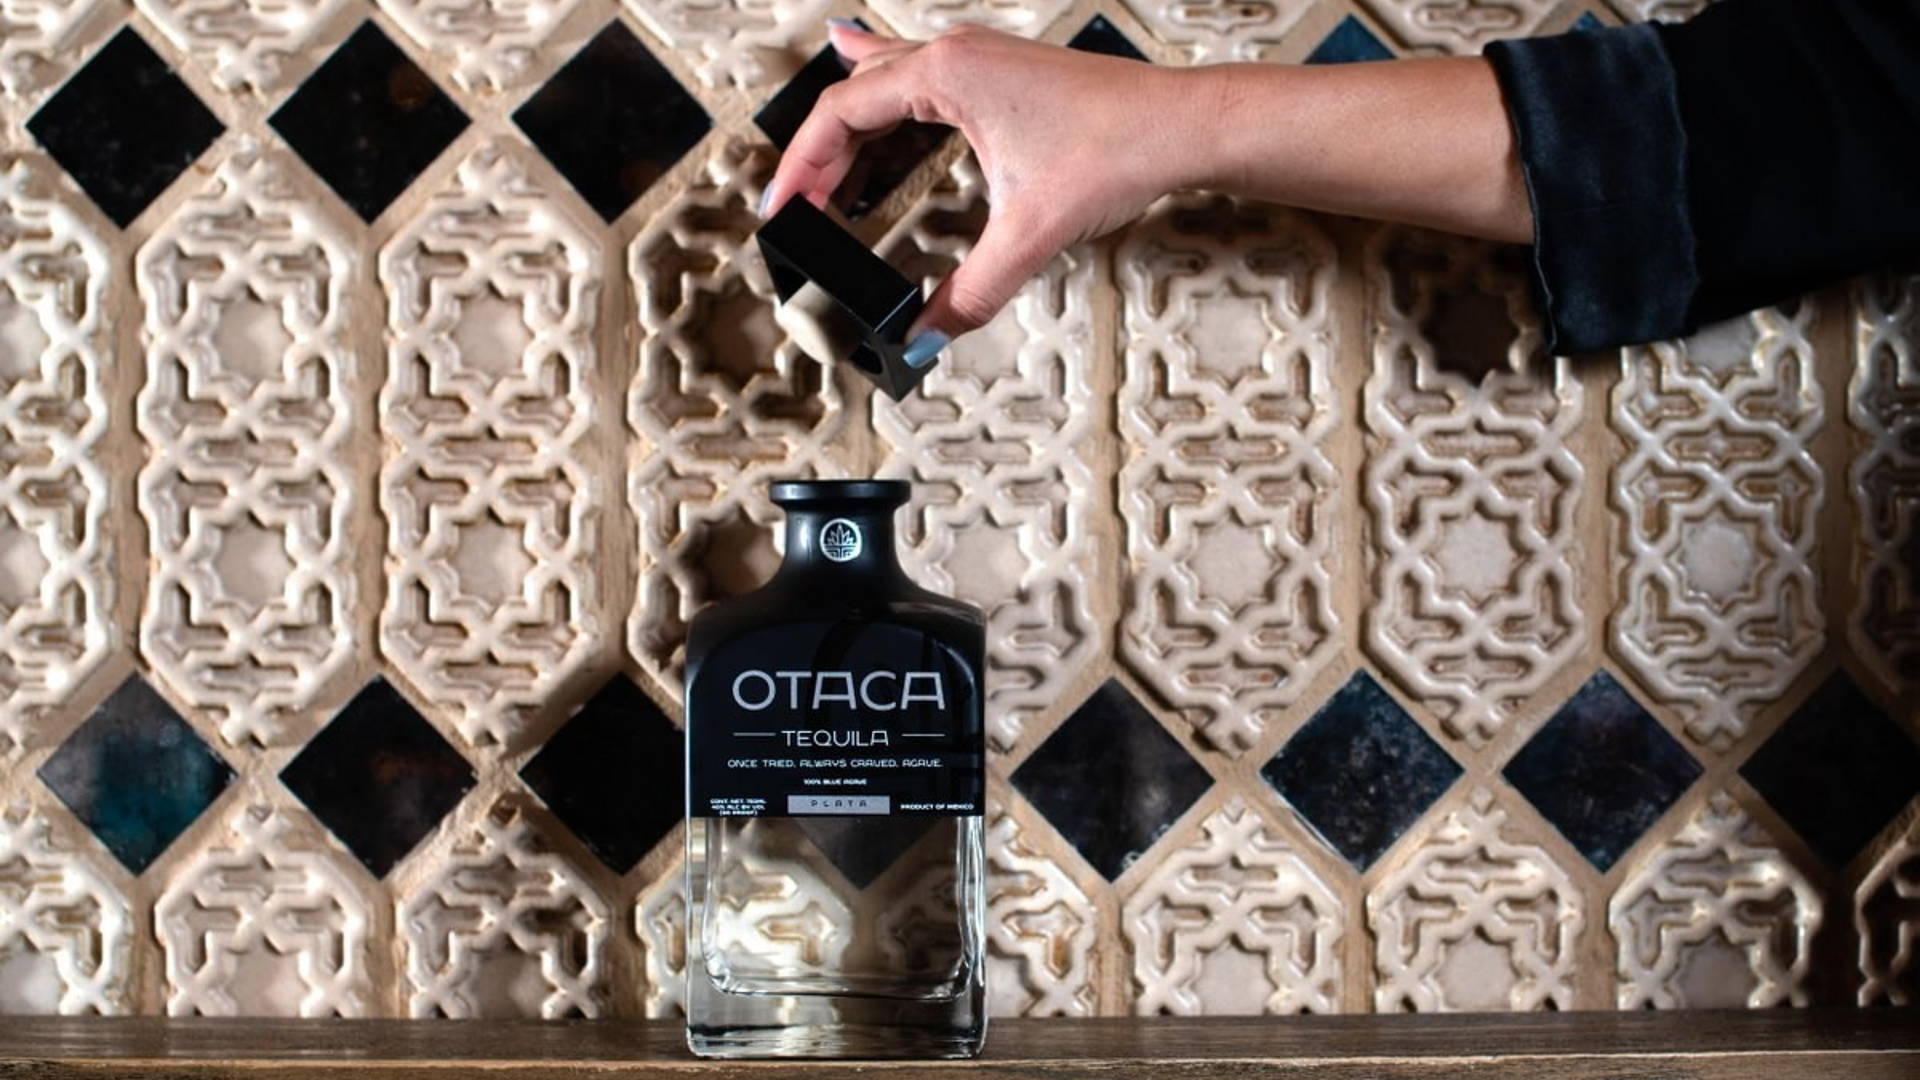 Featured image for Tequila Brand Otaca Uses NFC Tag That Enables Re-Ordering With a Smartphone